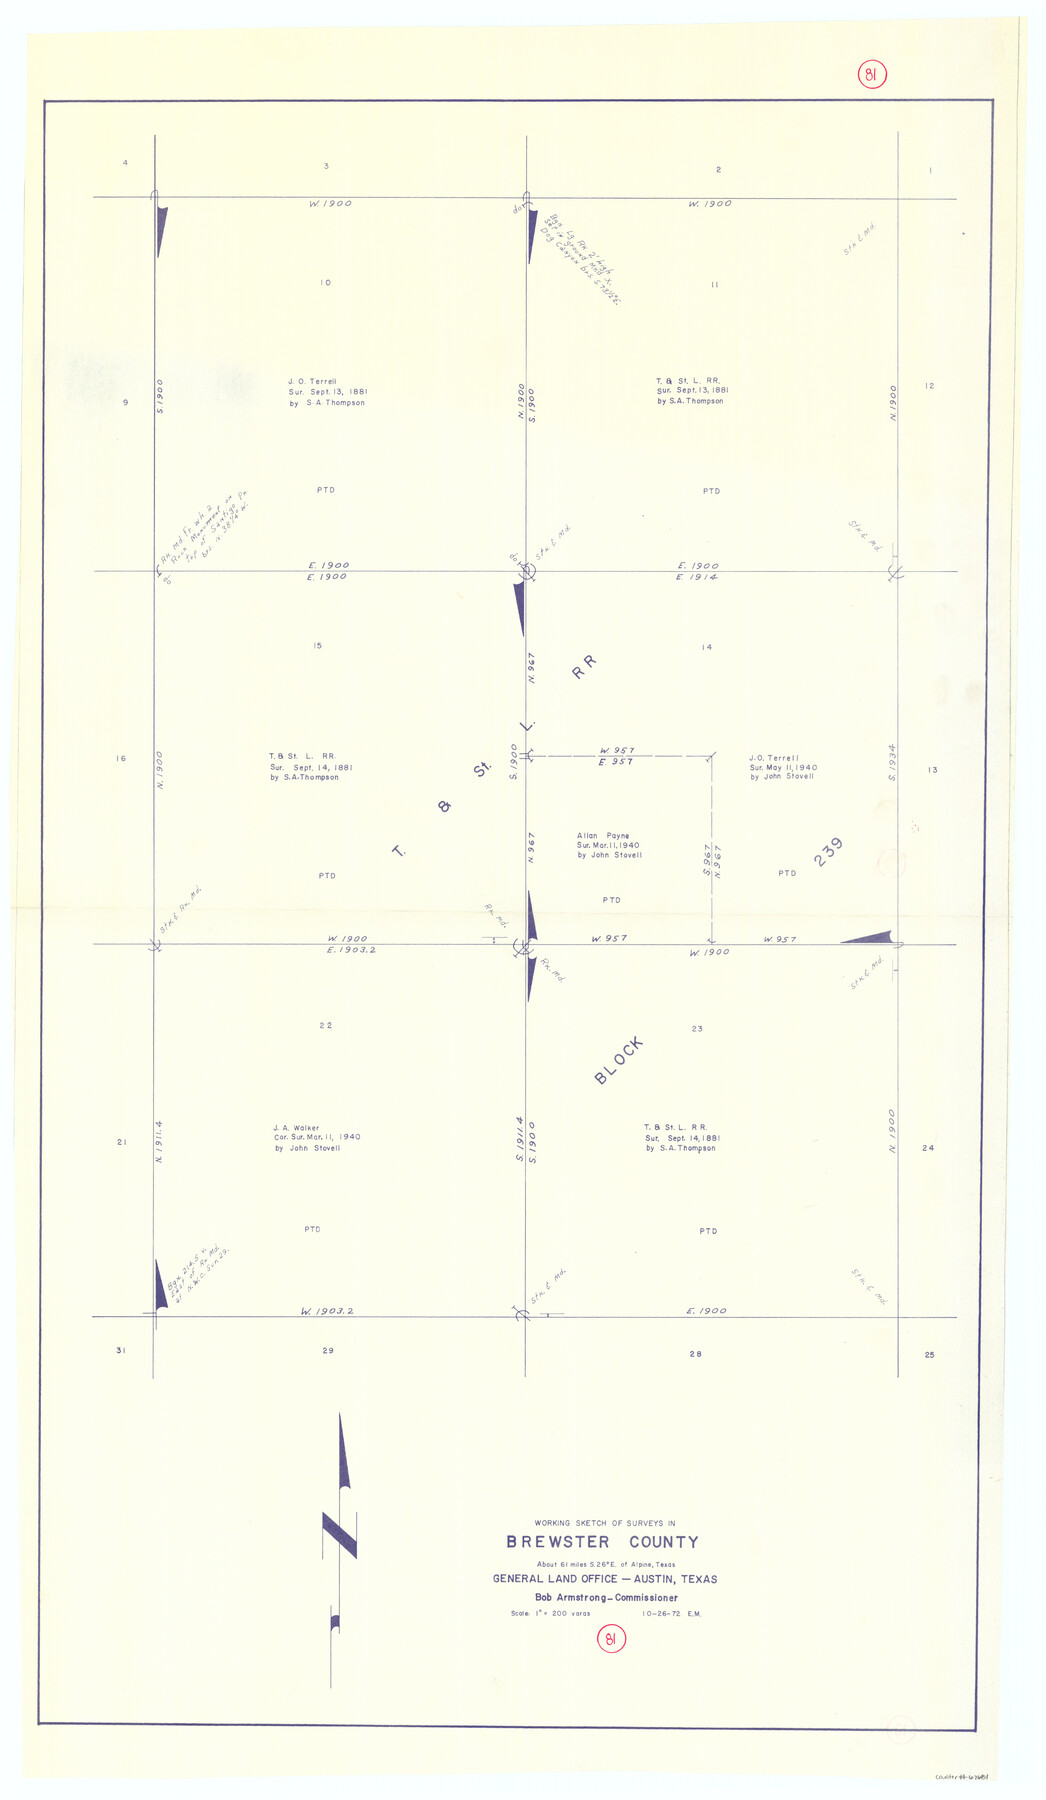 67681, Brewster County Working Sketch 81, General Map Collection